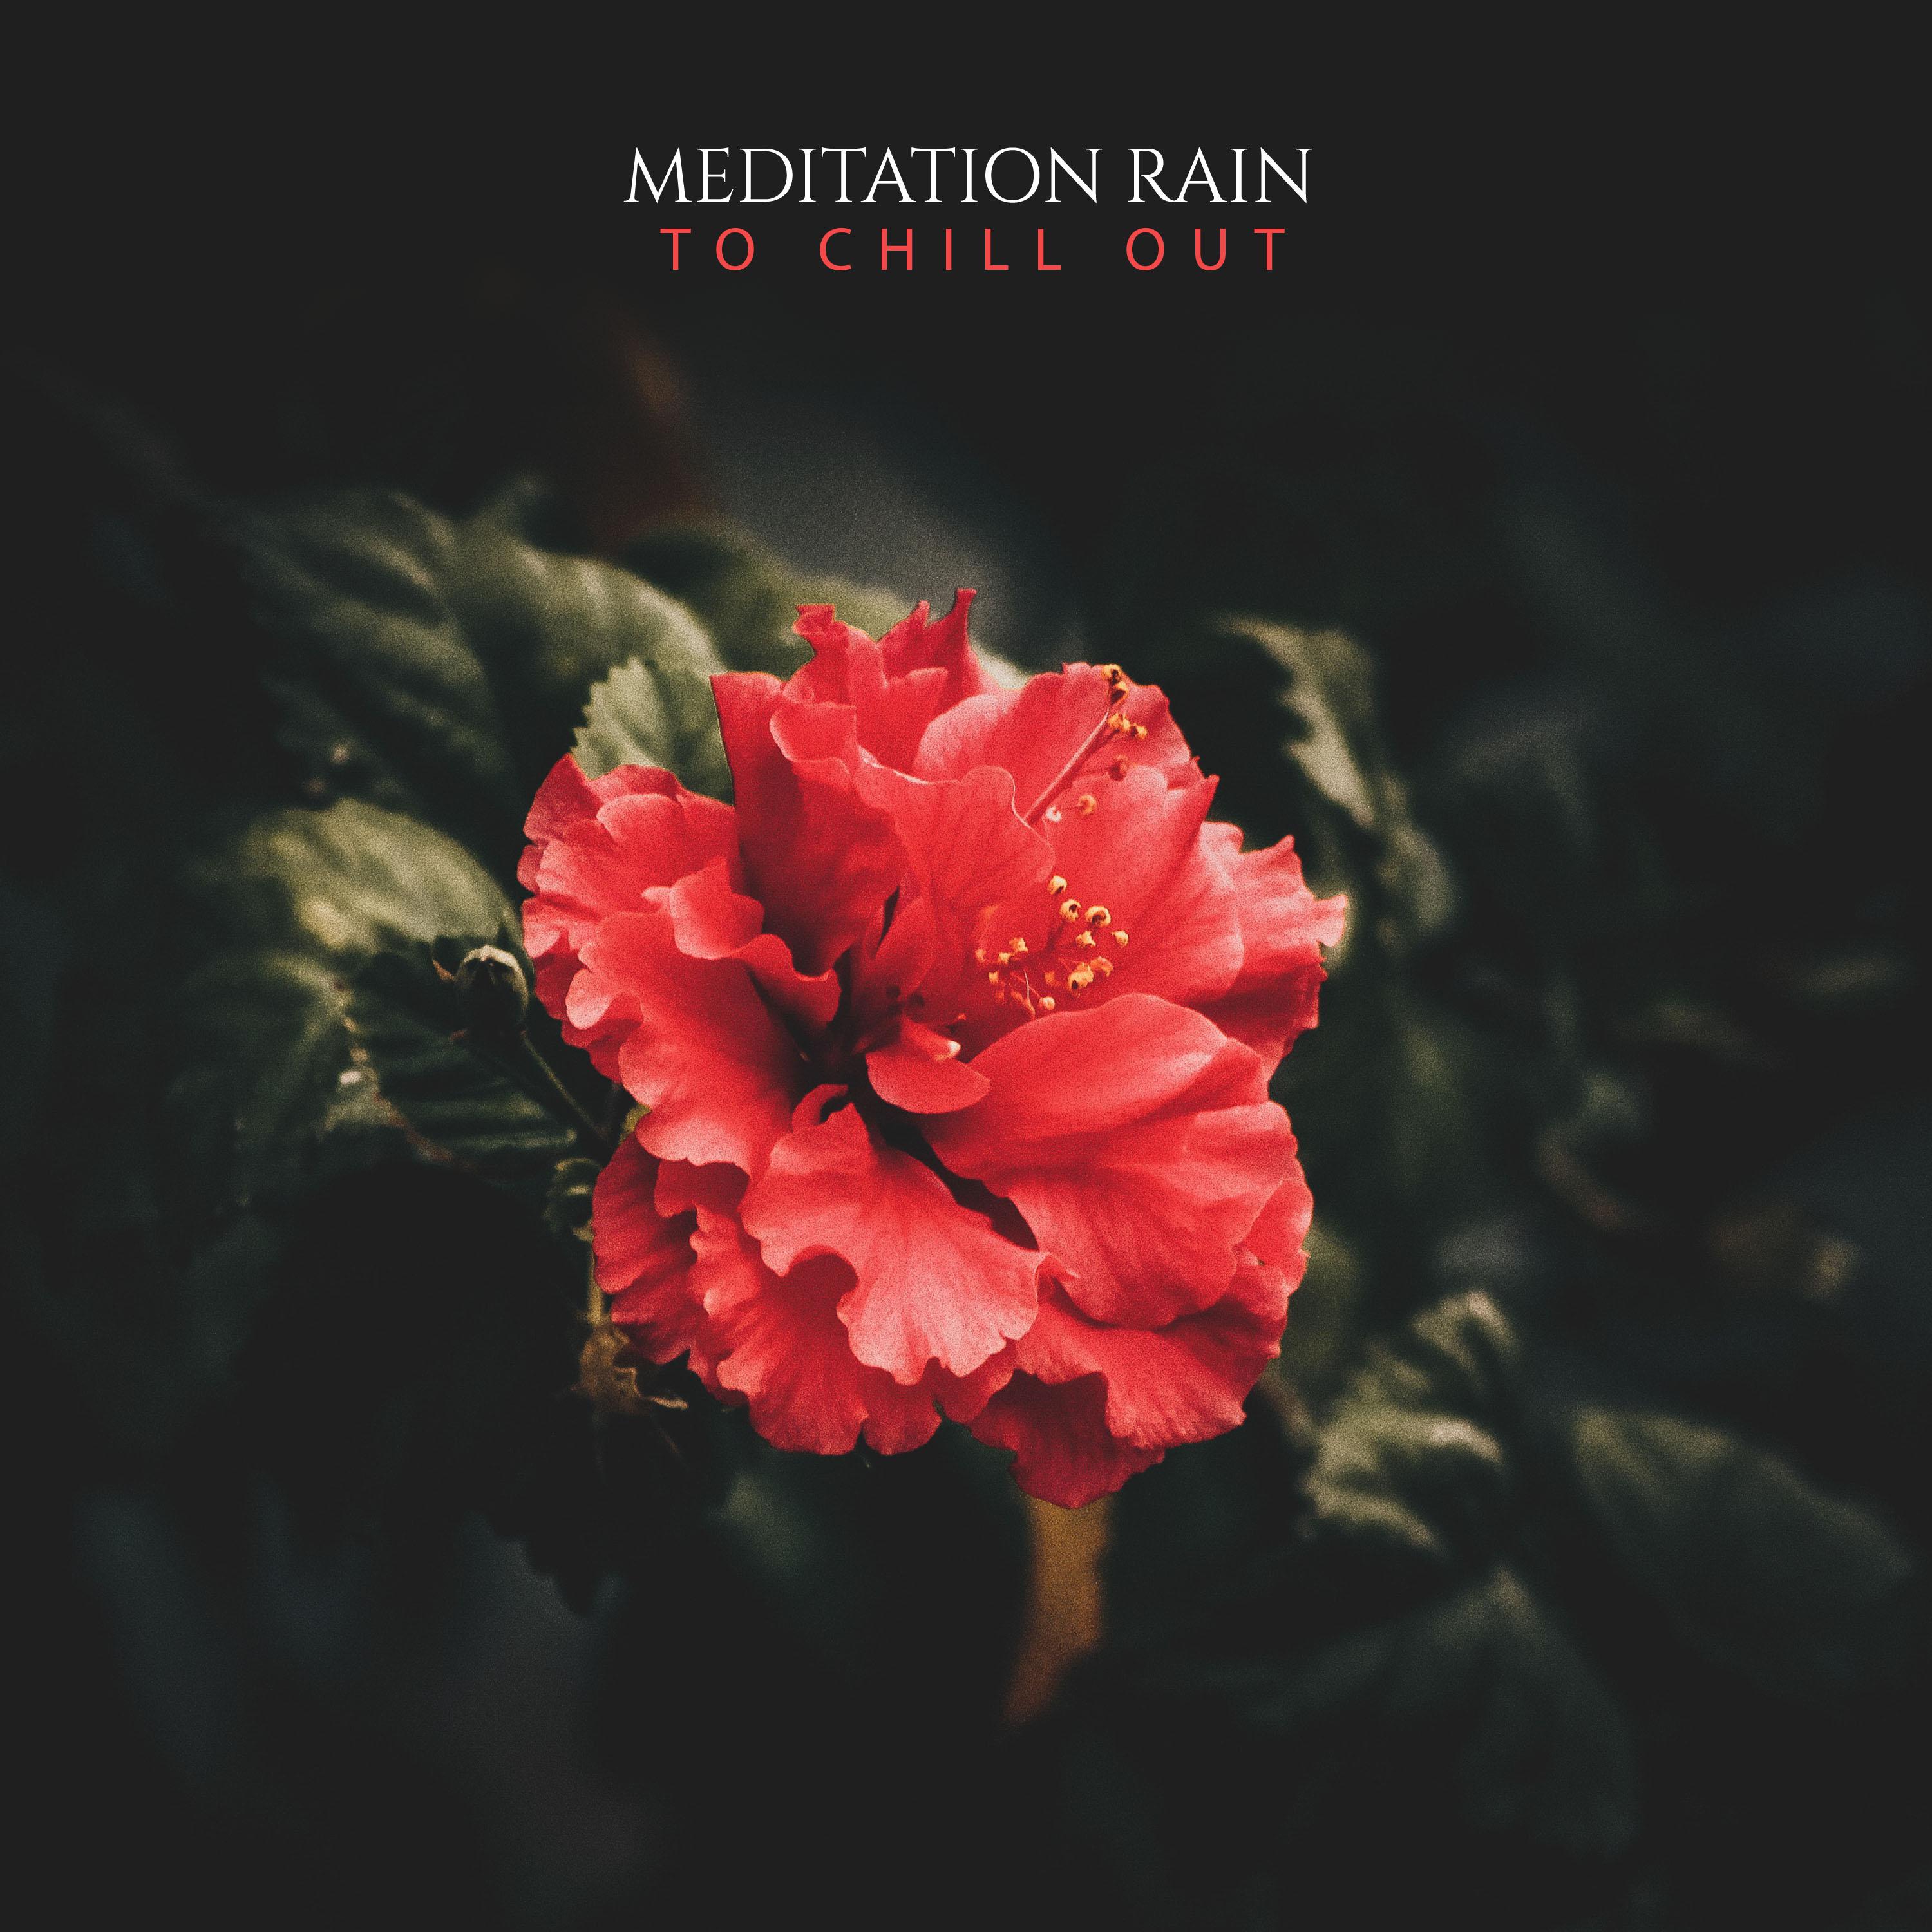 19 Meditation Rain Sounds to Chill Out